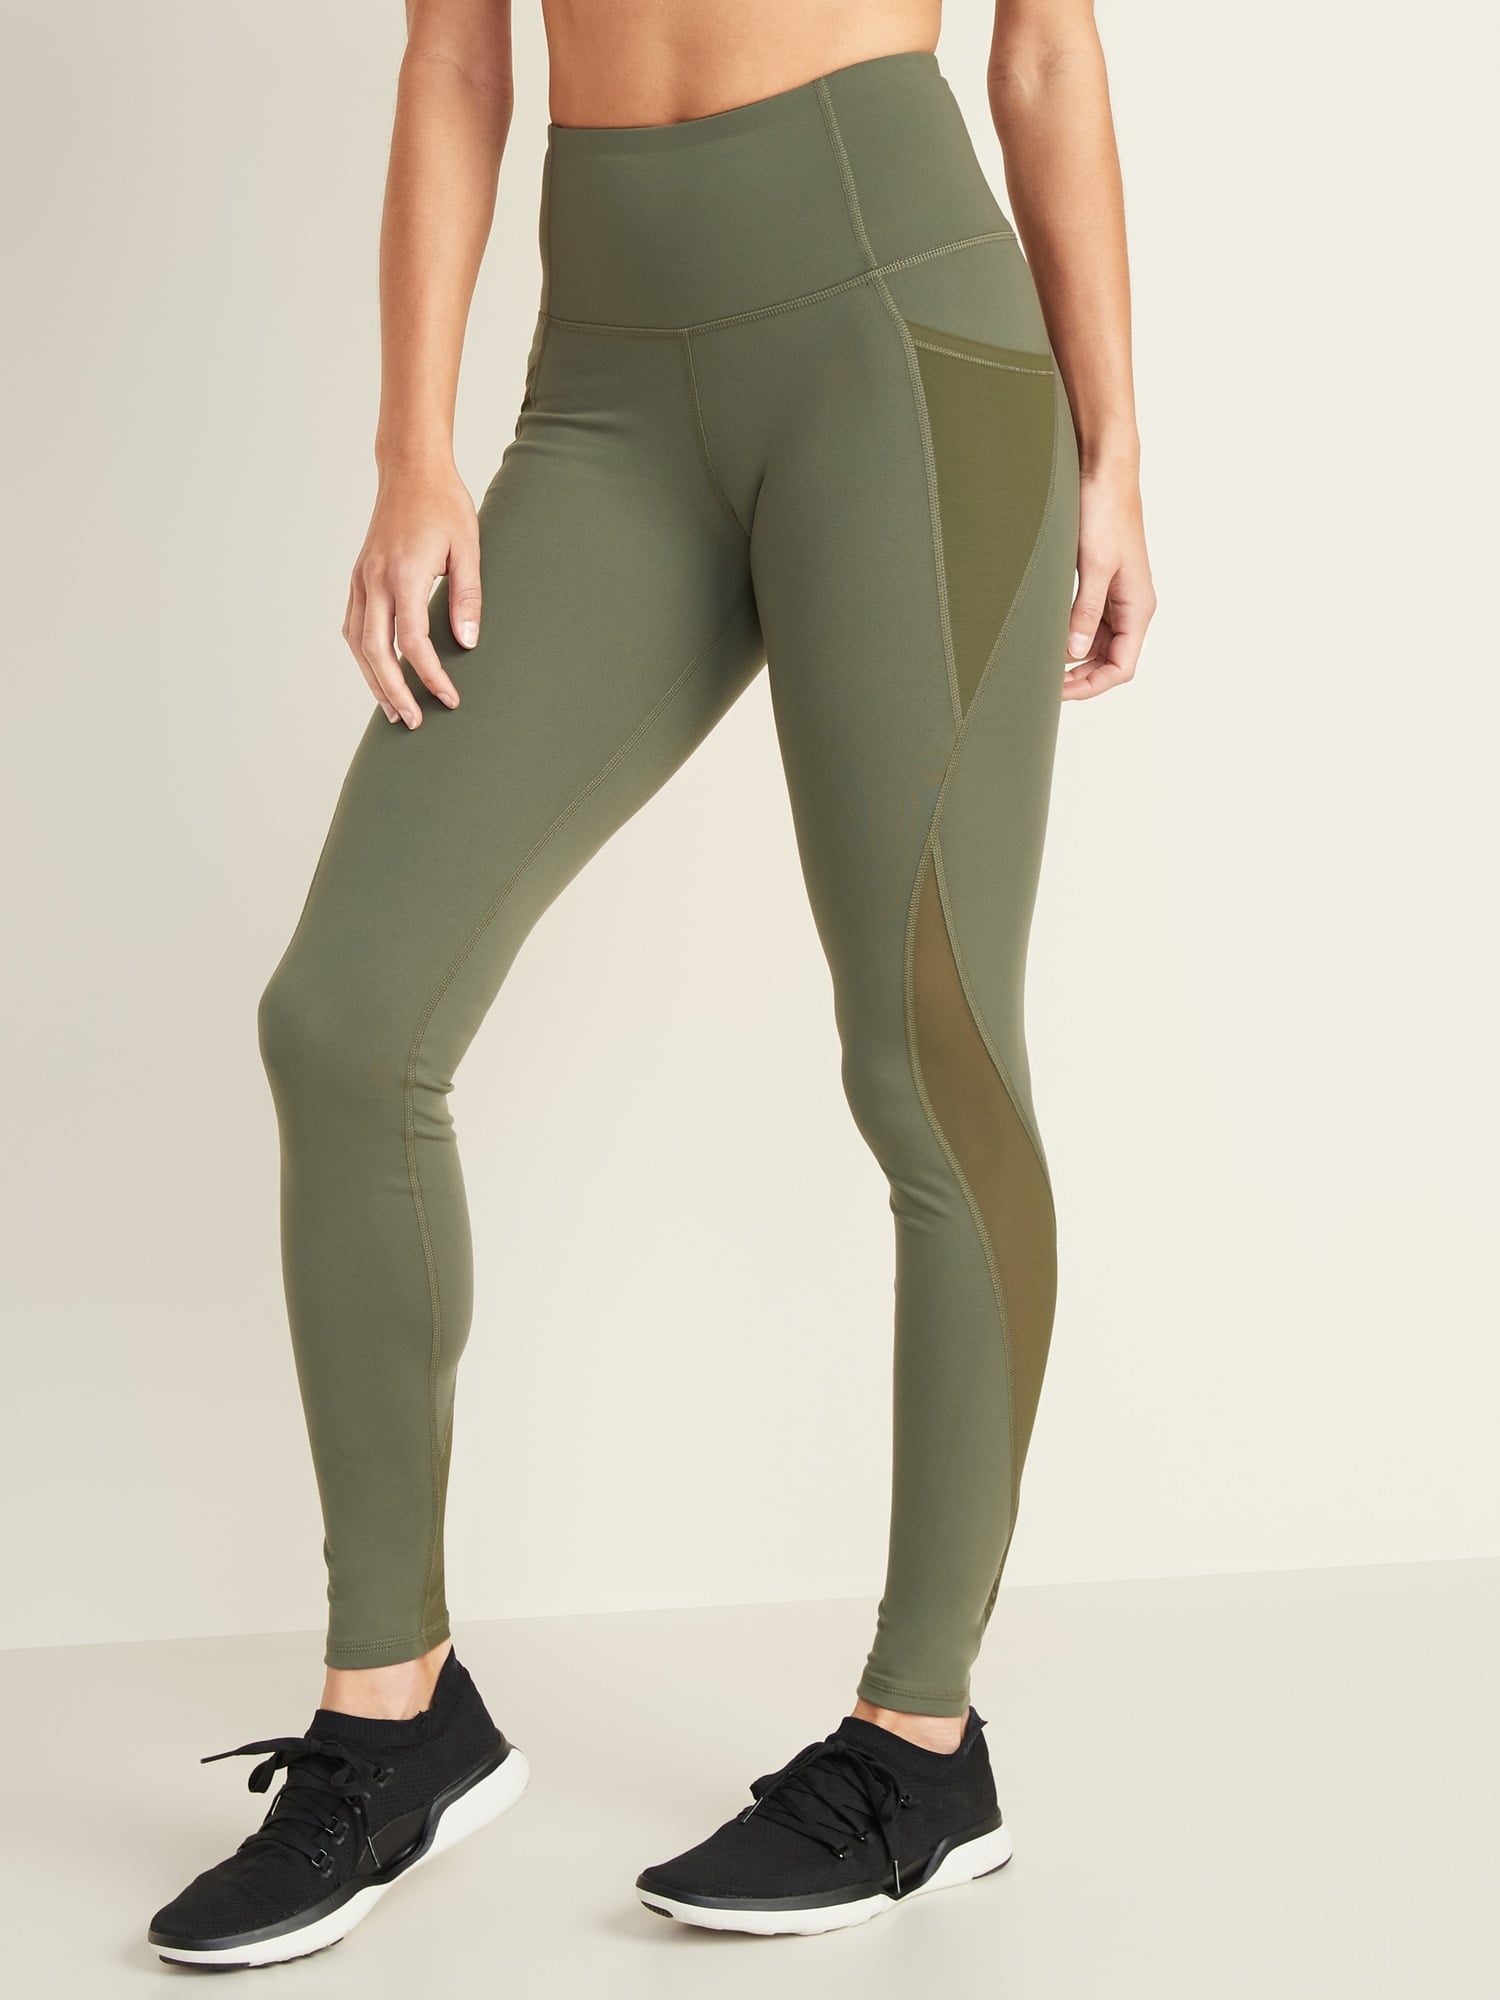 Old Navy Women's High-Waisted Elevate Mesh-Trim Compression